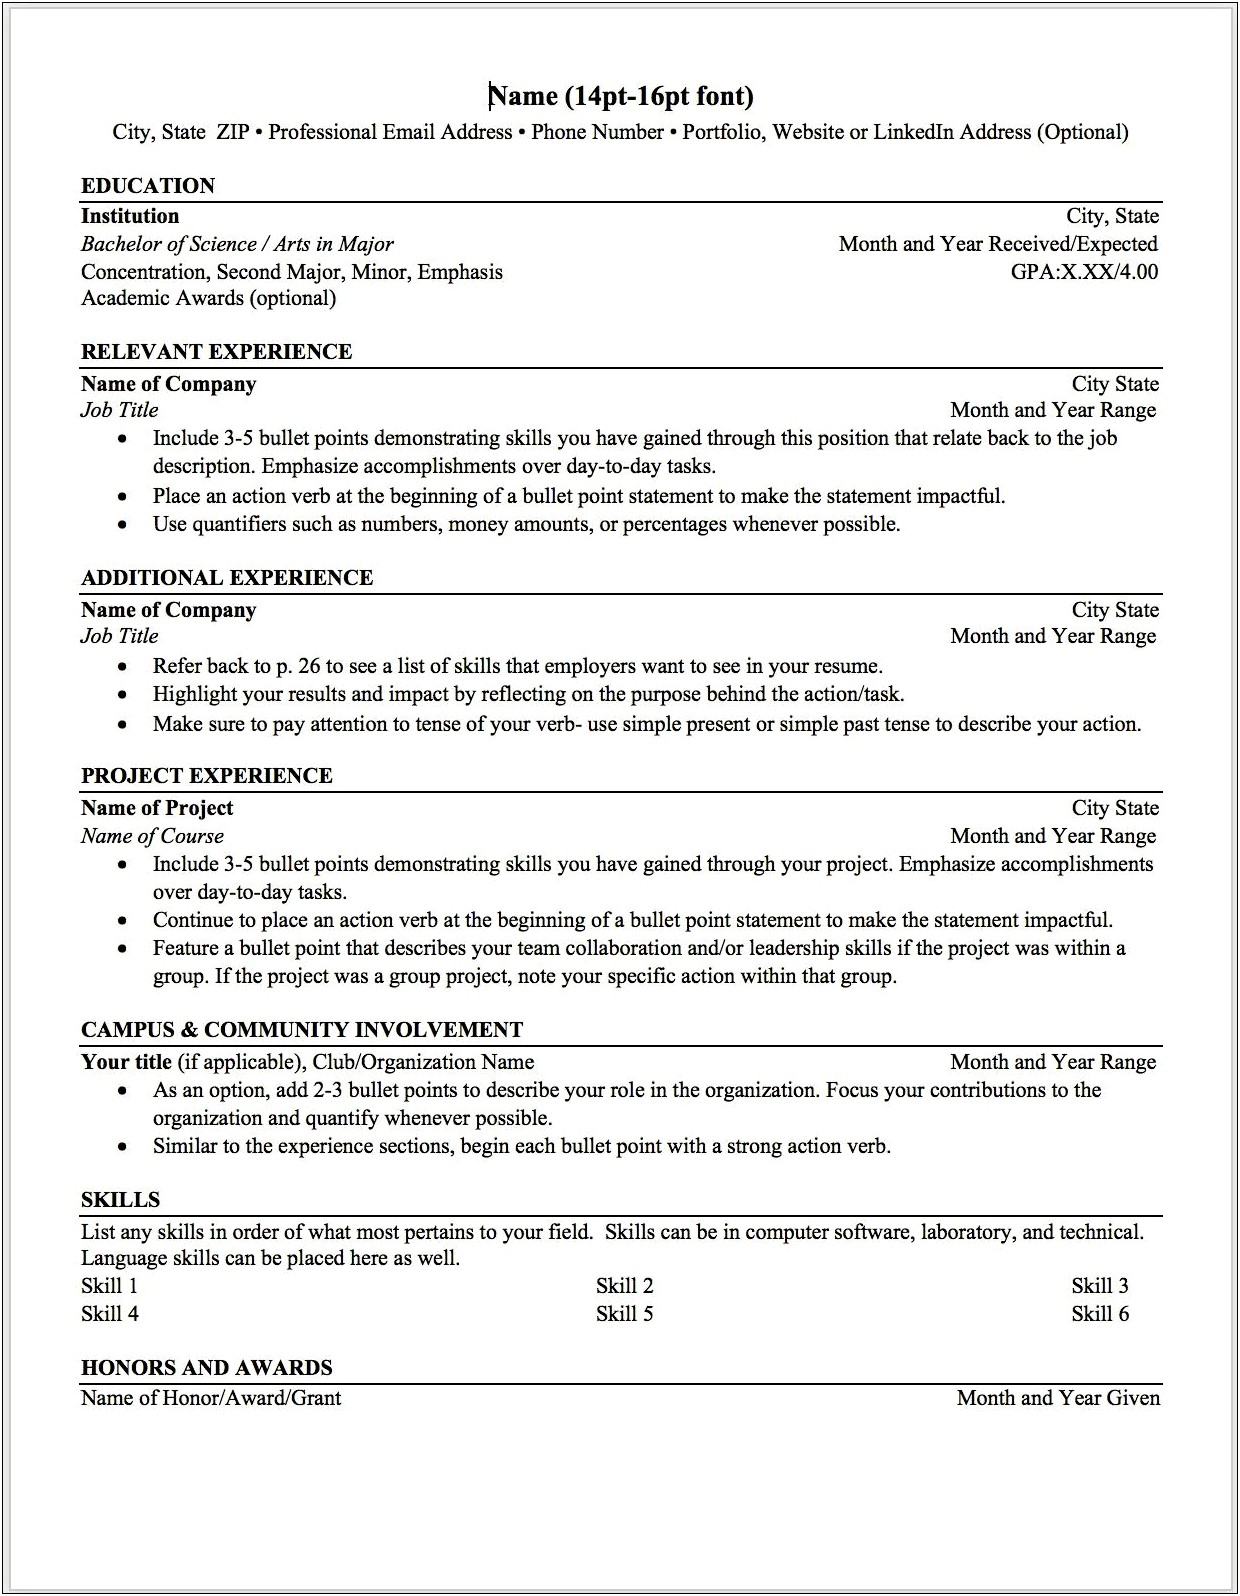 Interest Statement For Resume Examples